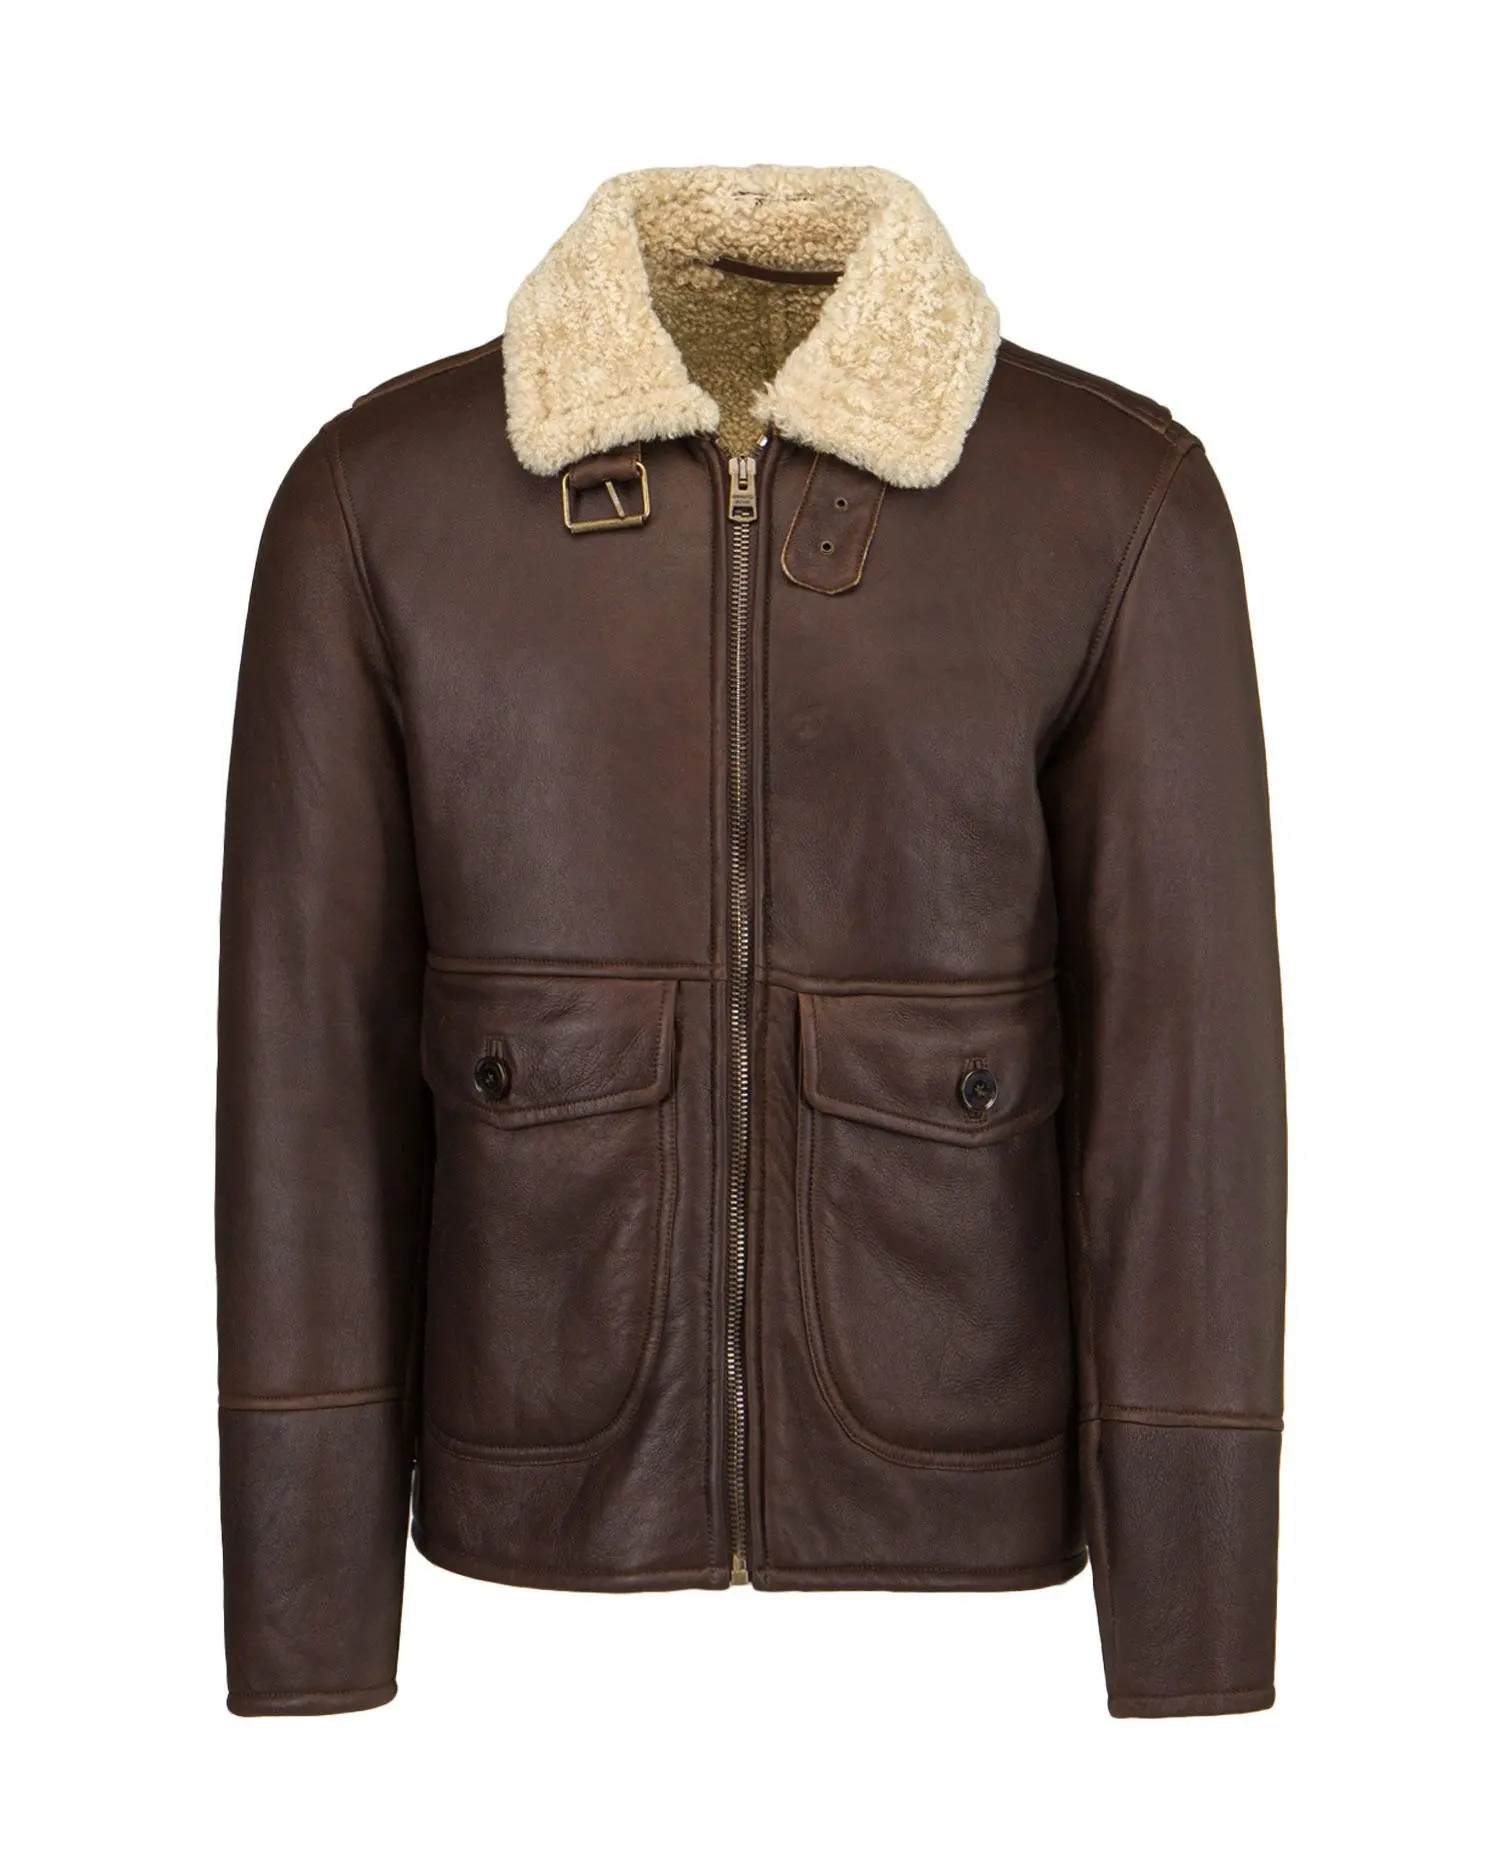 Minimal Style Sheepskin Leather Jacket For Men WIth Fur